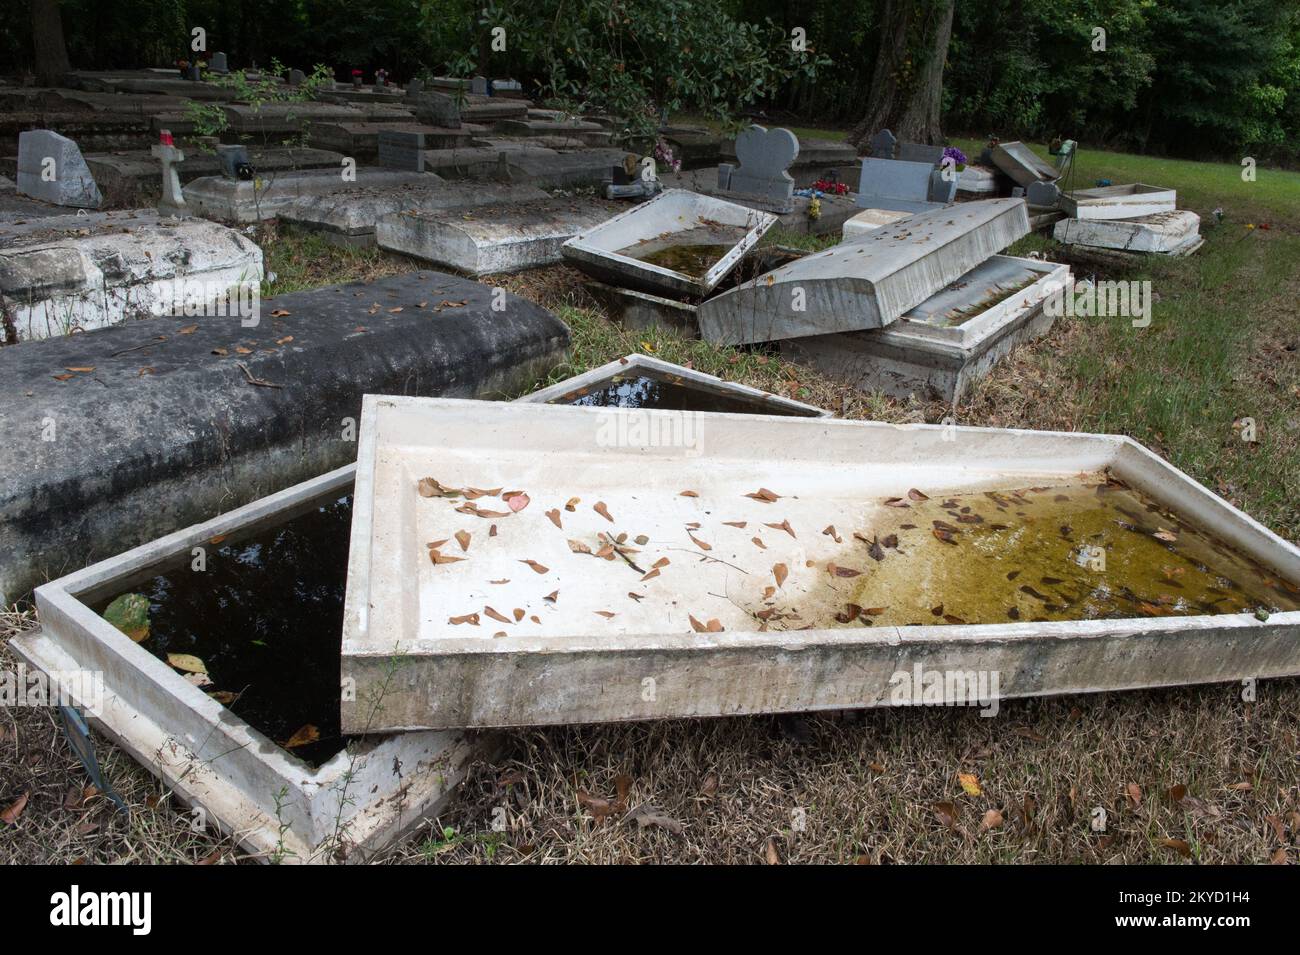 Aftermath of a cemetery innundated with floodwaters in Ascension Parish, La, where grave vaults were broken and covers dislodged, sending caskets floating away.. Louisiana Severe Storms and Flooding. Photographs Relating to Disasters and Emergency Management Programs, Activities, and Officials Stock Photo